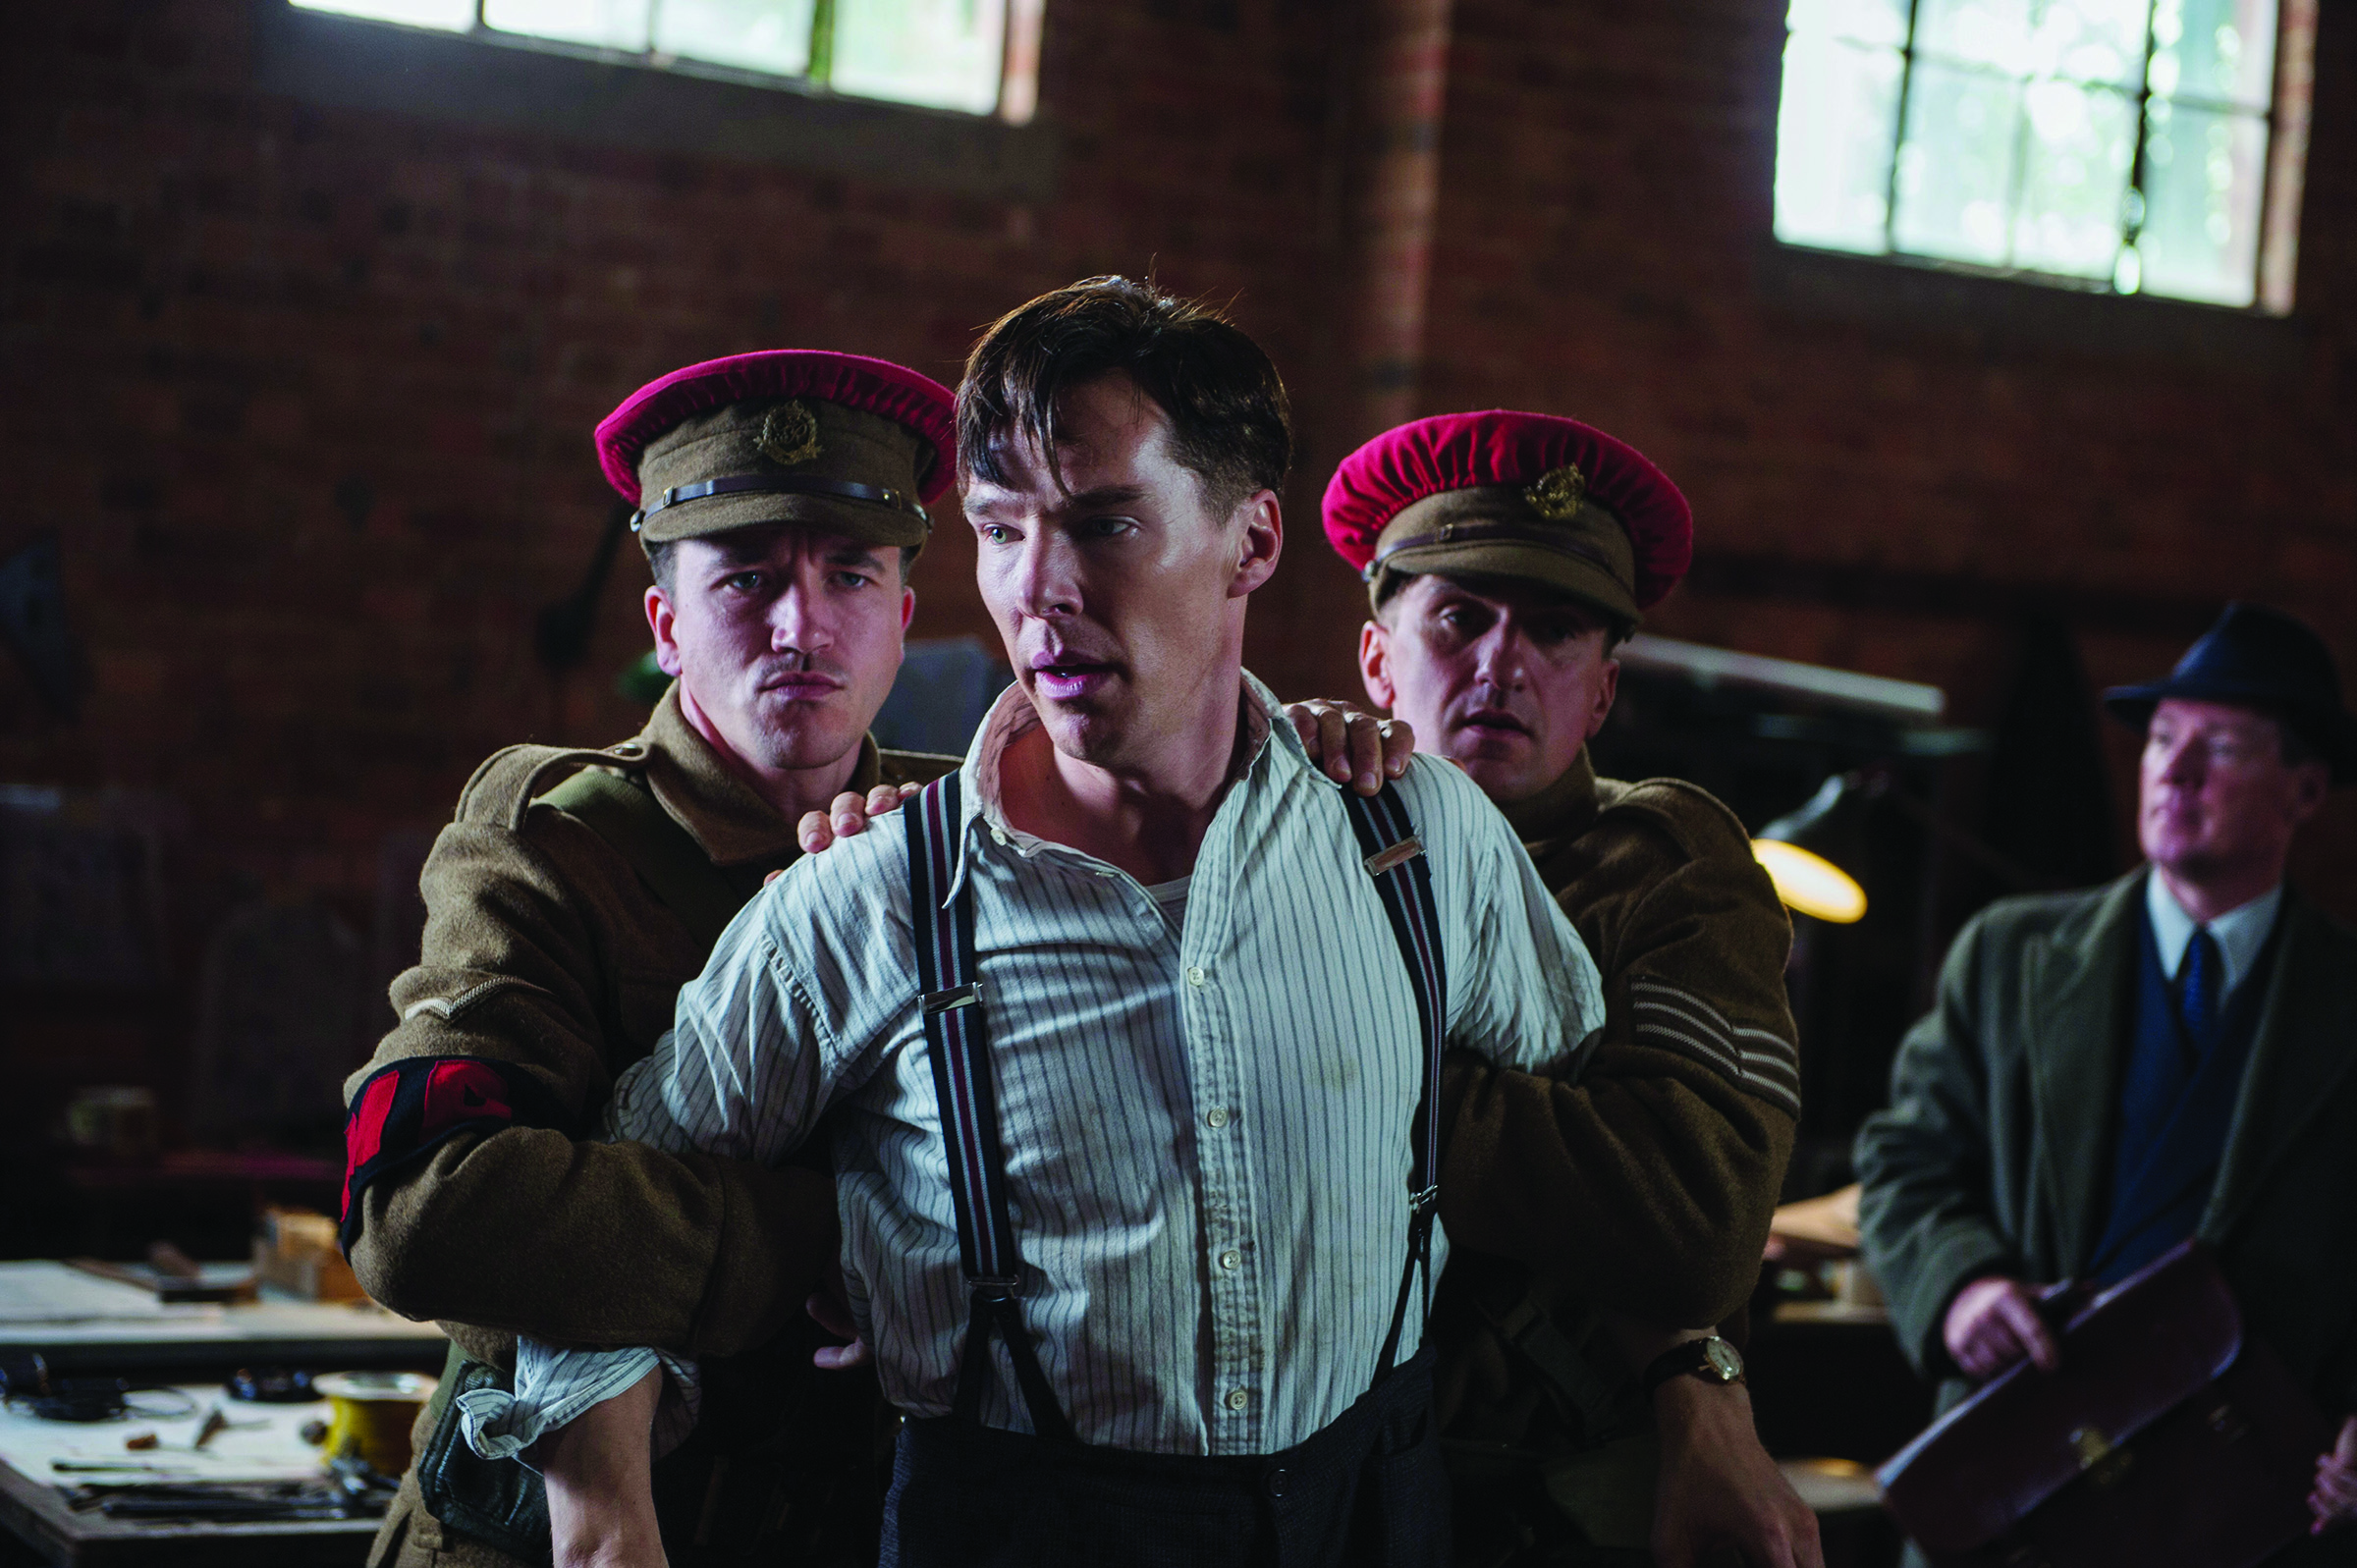 Learning from ‘The Imitation Game’